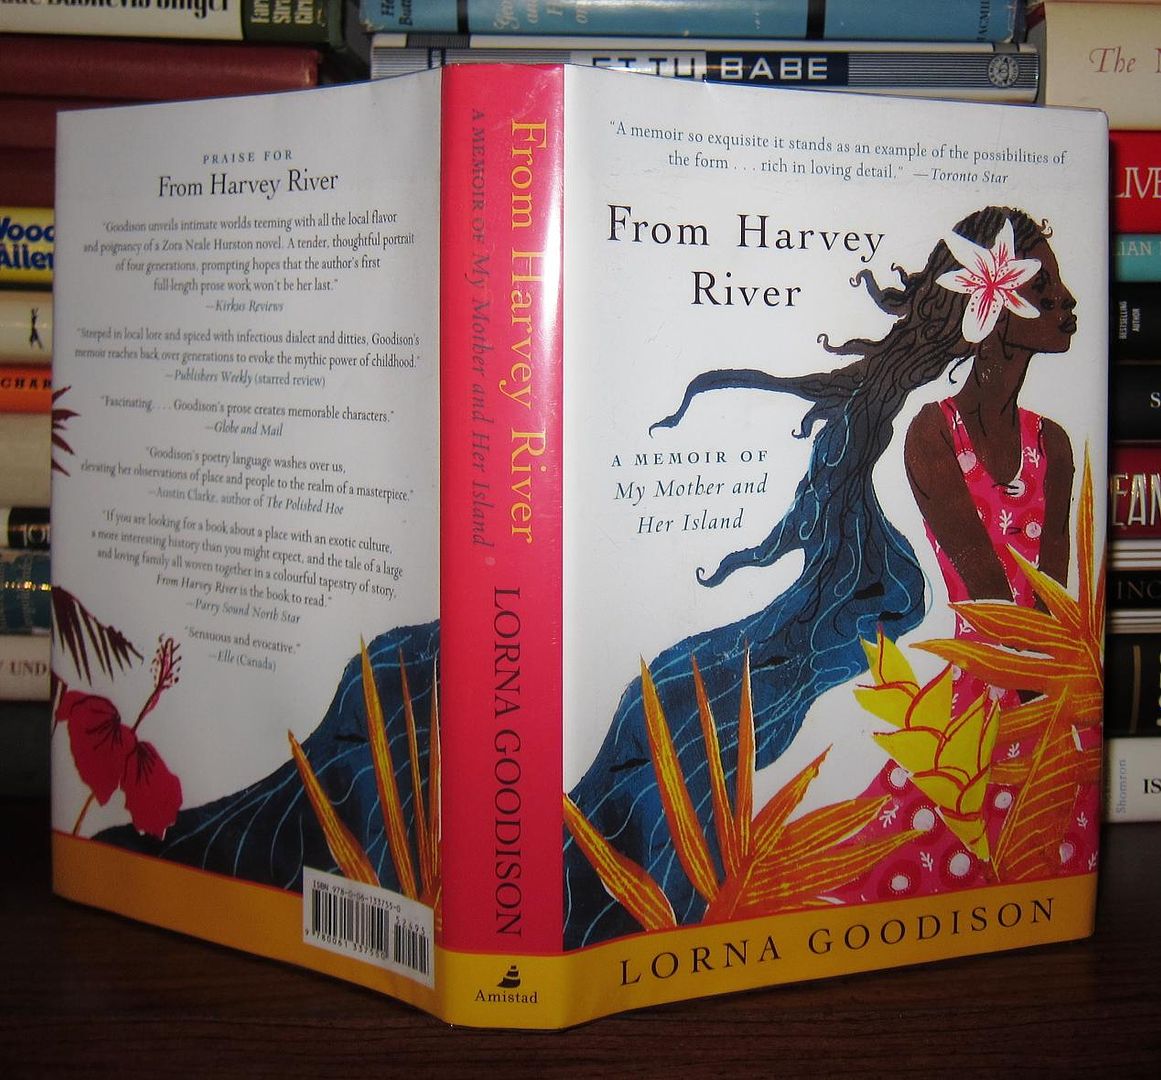 GOODISON, LORNA - From Harvey River a Memoir of My Mother and Her Island